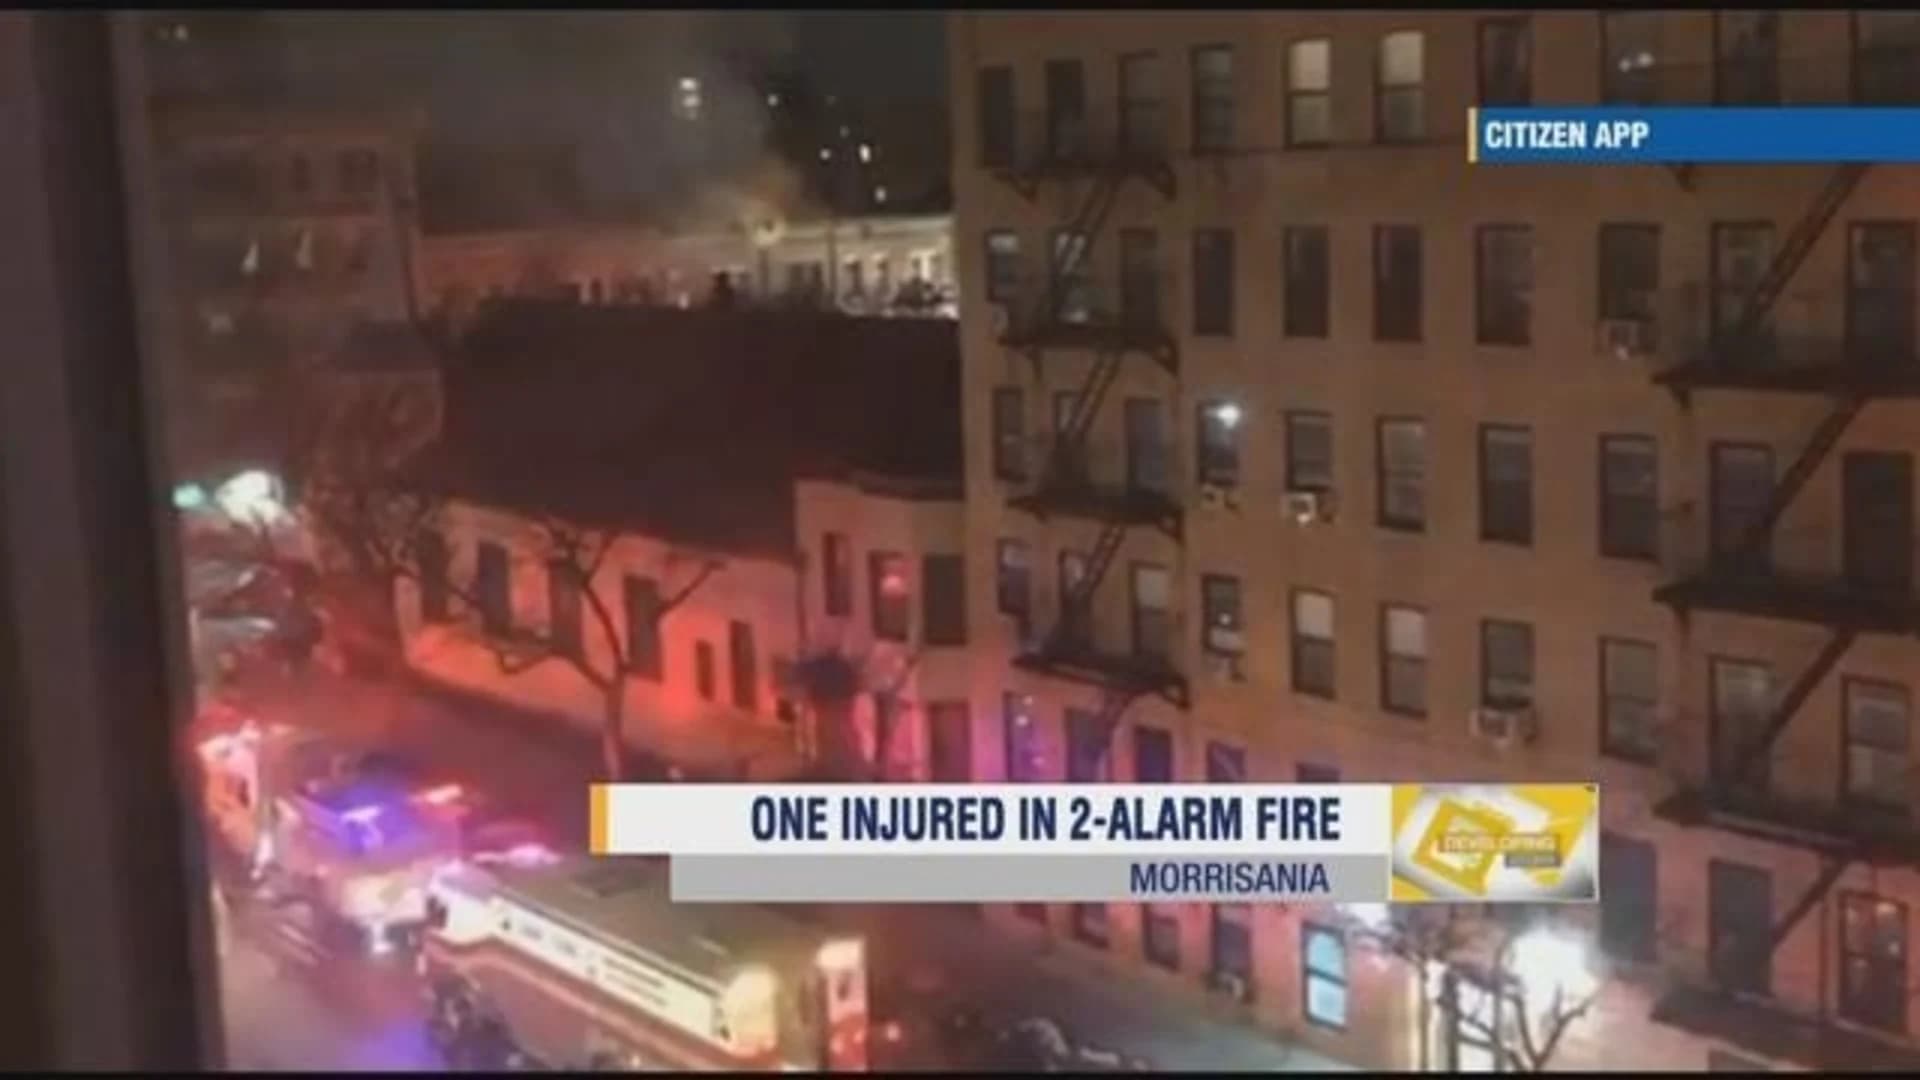 FDNY: 1 seriously hurt in 2-alarm fire in Morrisania